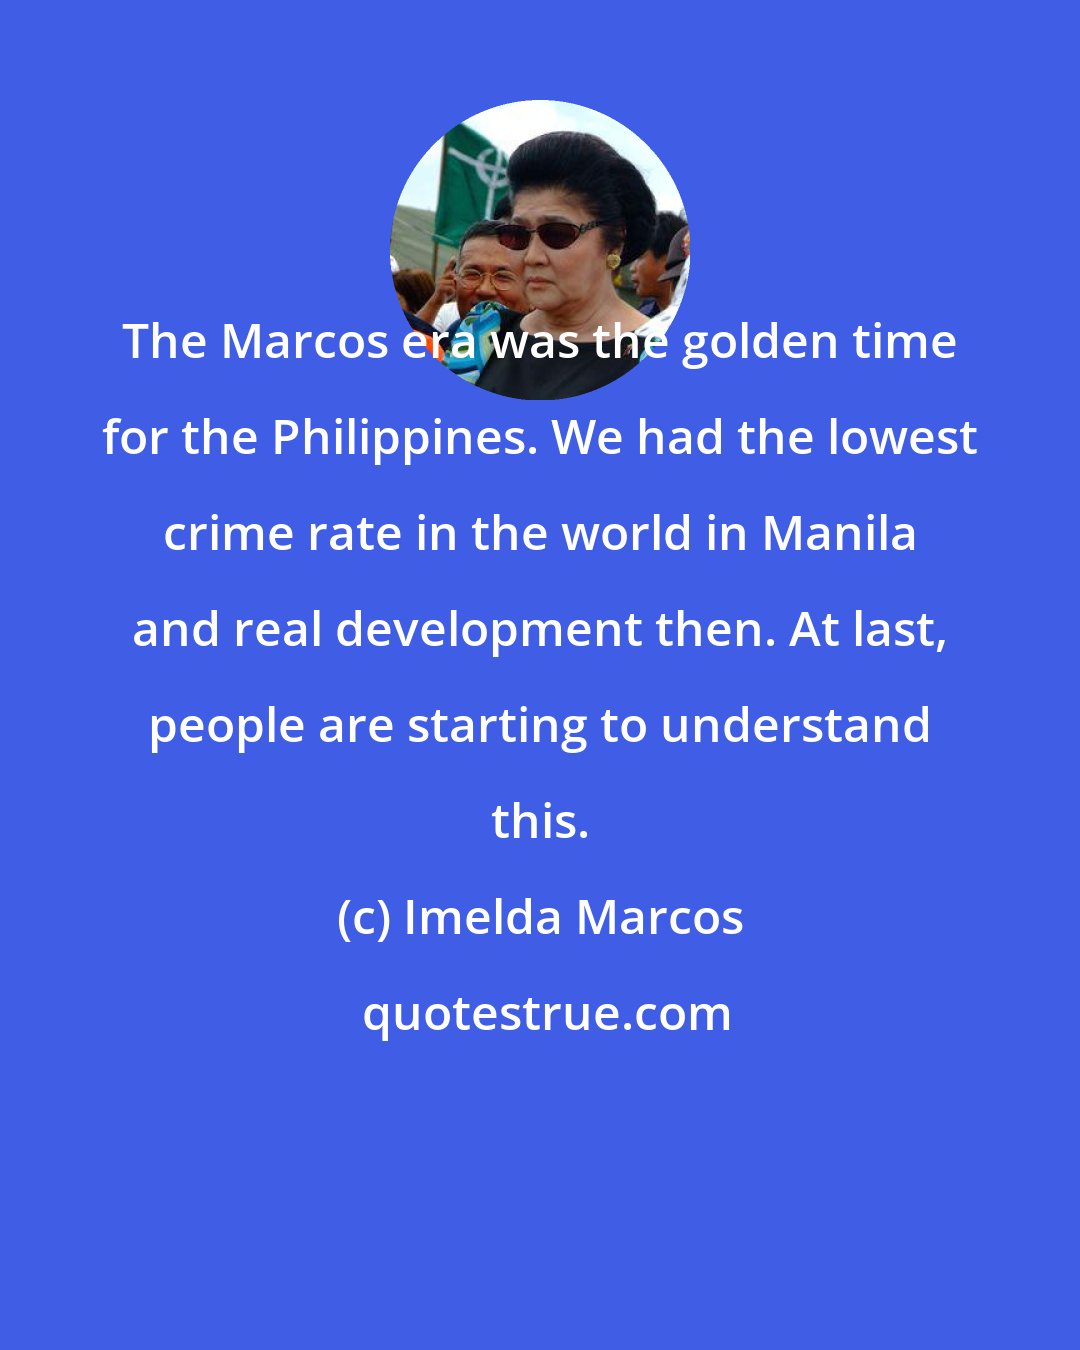 Imelda Marcos: The Marcos era was the golden time for the Philippines. We had the lowest crime rate in the world in Manila and real development then. At last, people are starting to understand this.